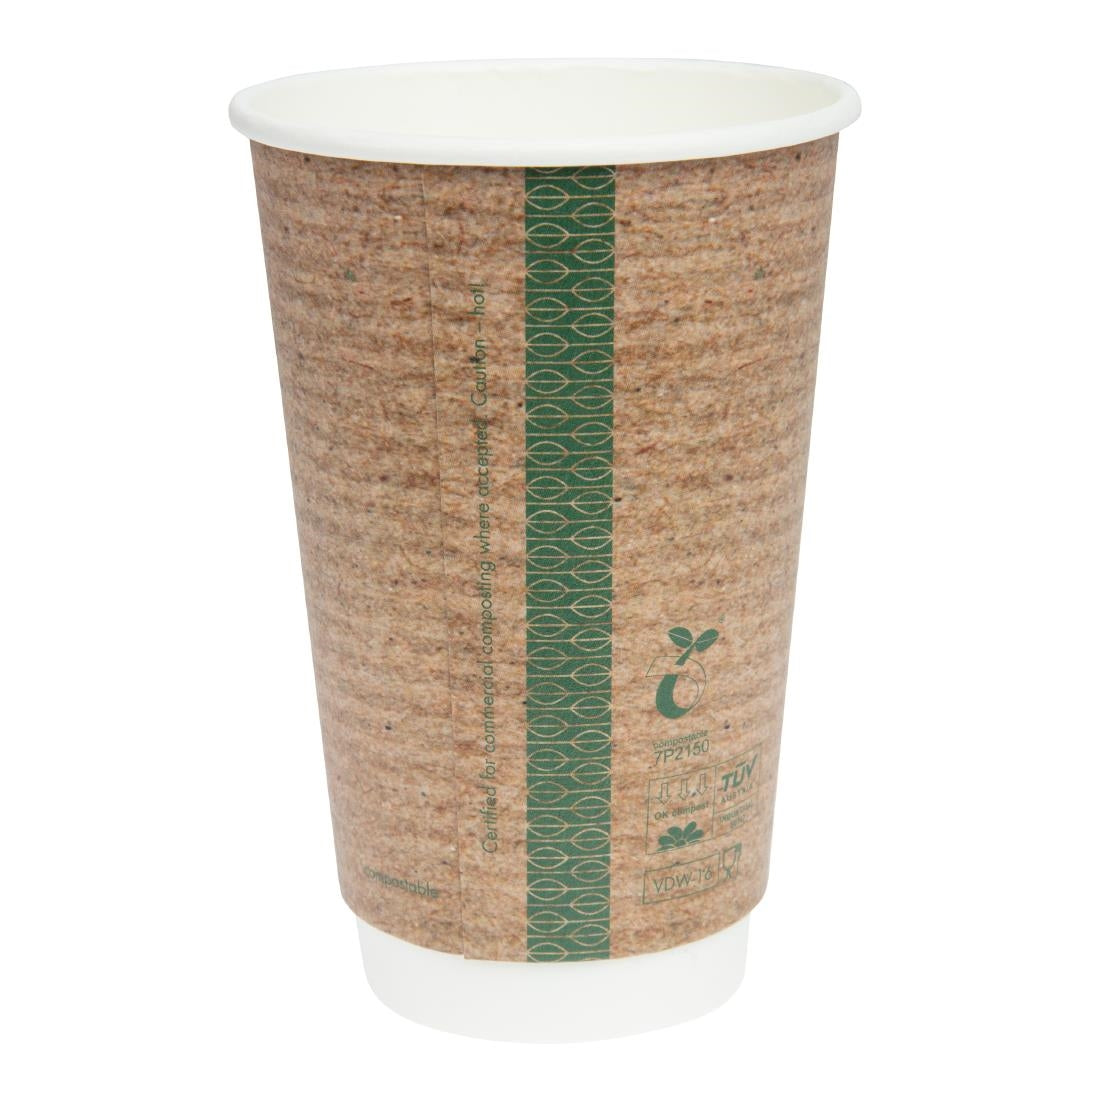 GH022 Vegware Compostable Hot Cups 455ml / 16oz (Pack of 400)